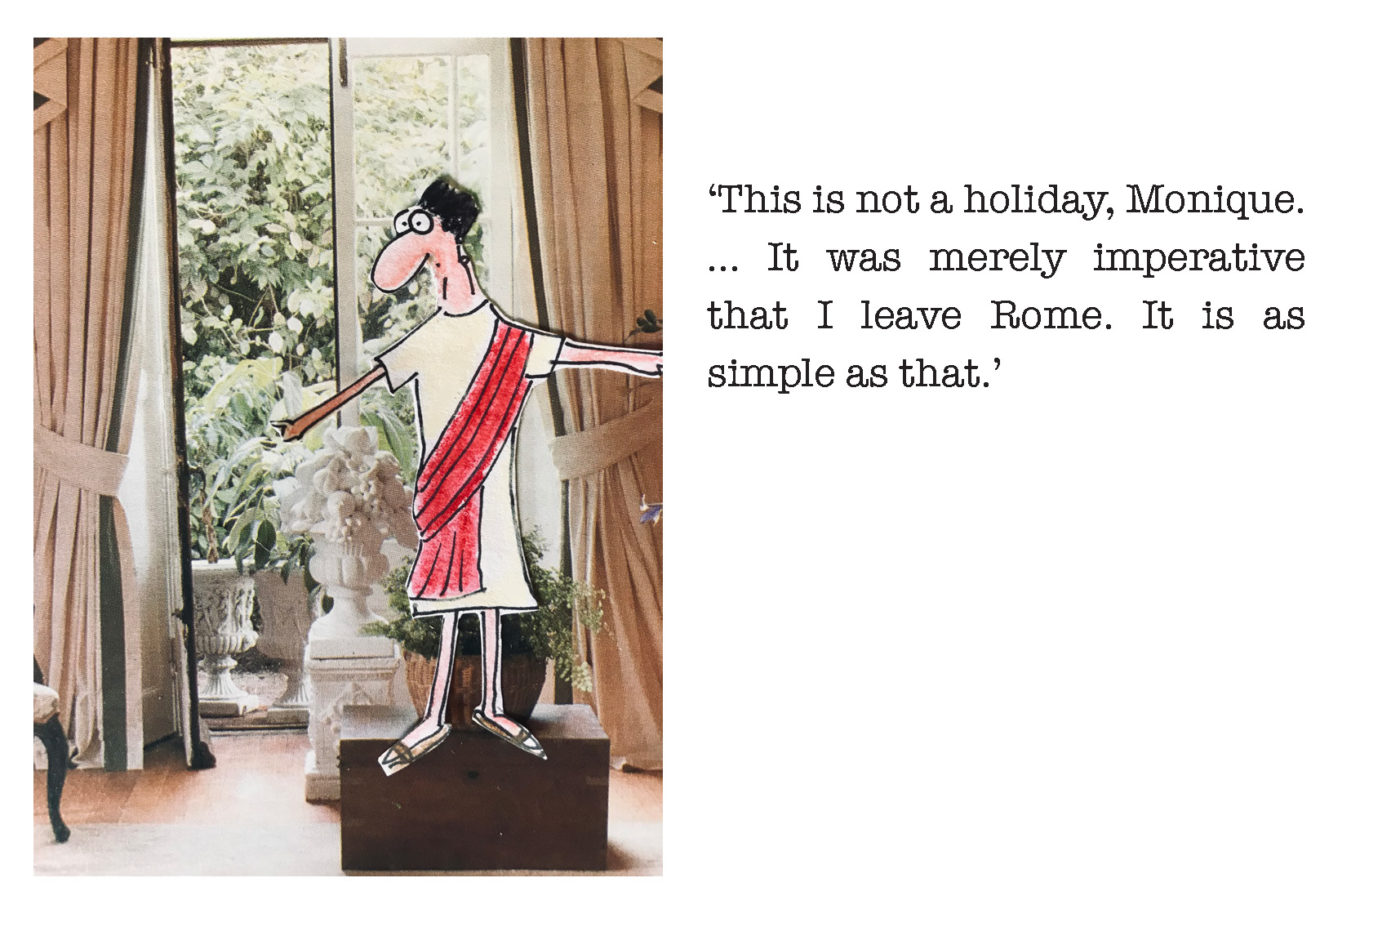 Mix media image of cartoon man in Roman clothing standing in a bedroom. Text next to image reads "This is not a holiday, Monique... It was merely imperative that I leave Rome. It is as simple as that."